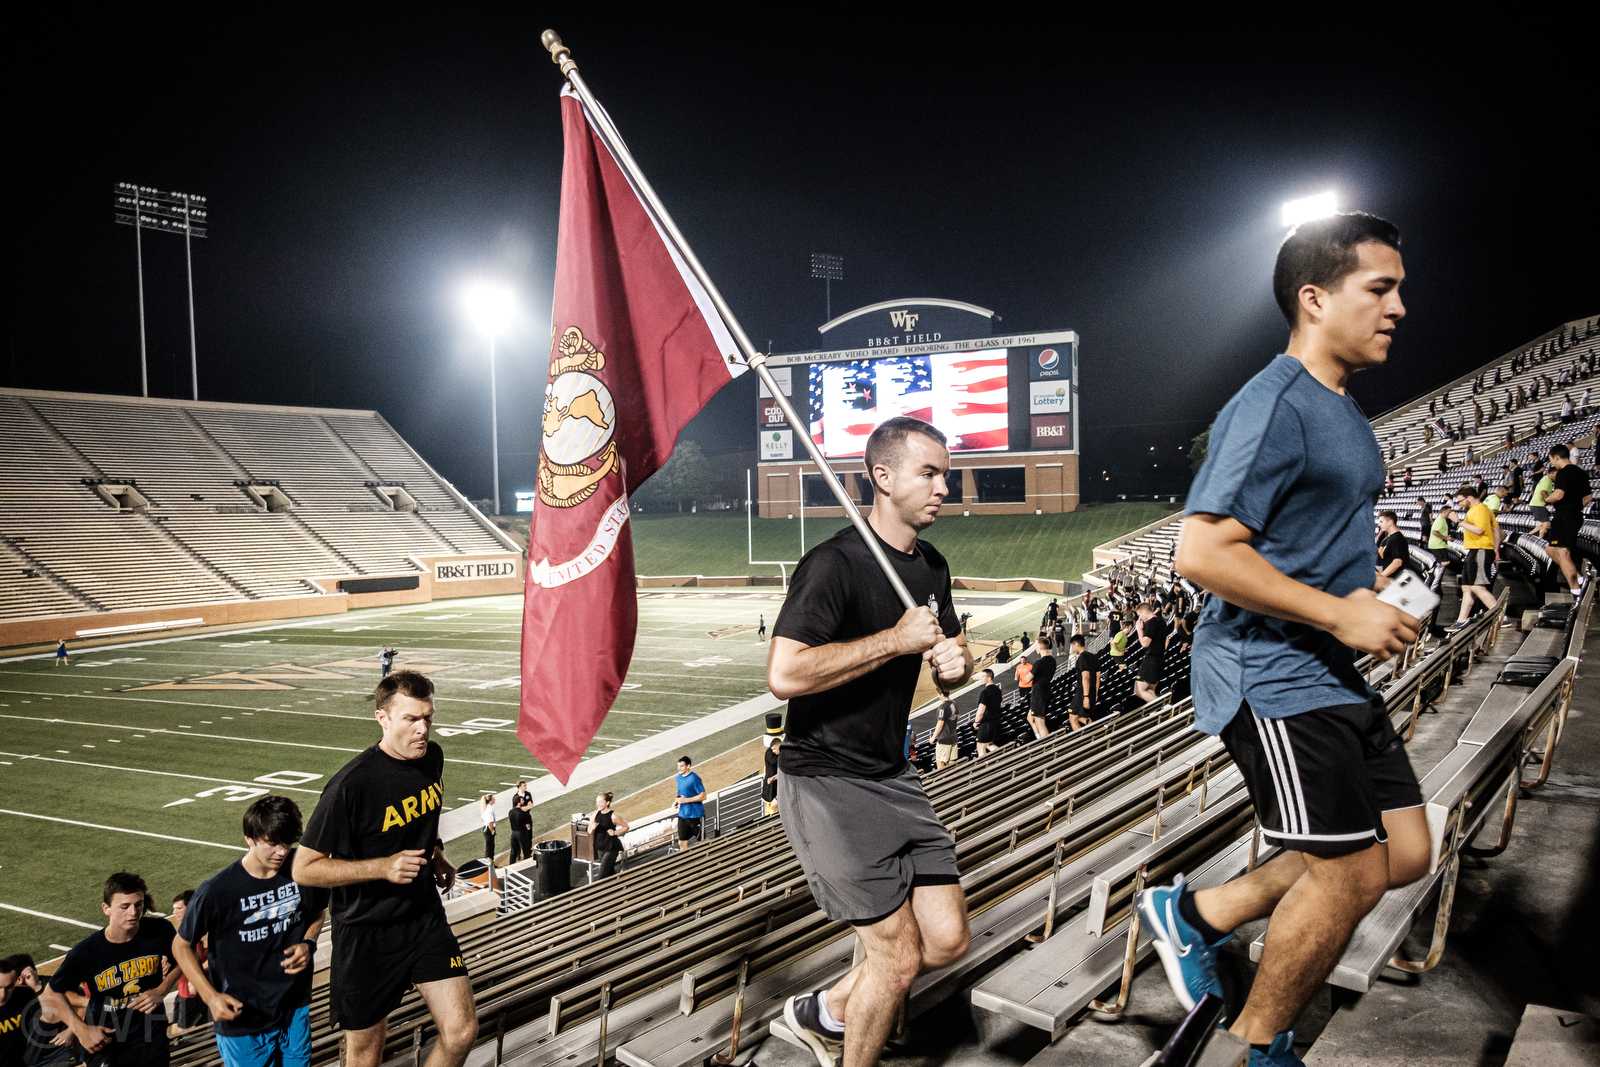 Wake Forest hosts a memorial stair climb to honor the anniversay of 9/11 at BB&T Field on Wednesday, September 11, 2019. Members of the joint ROTC program with Salem College and Winston-Salem State University join local first responders, athletic teams, and local citizens to climb 2996 stairs in honor of the victims.